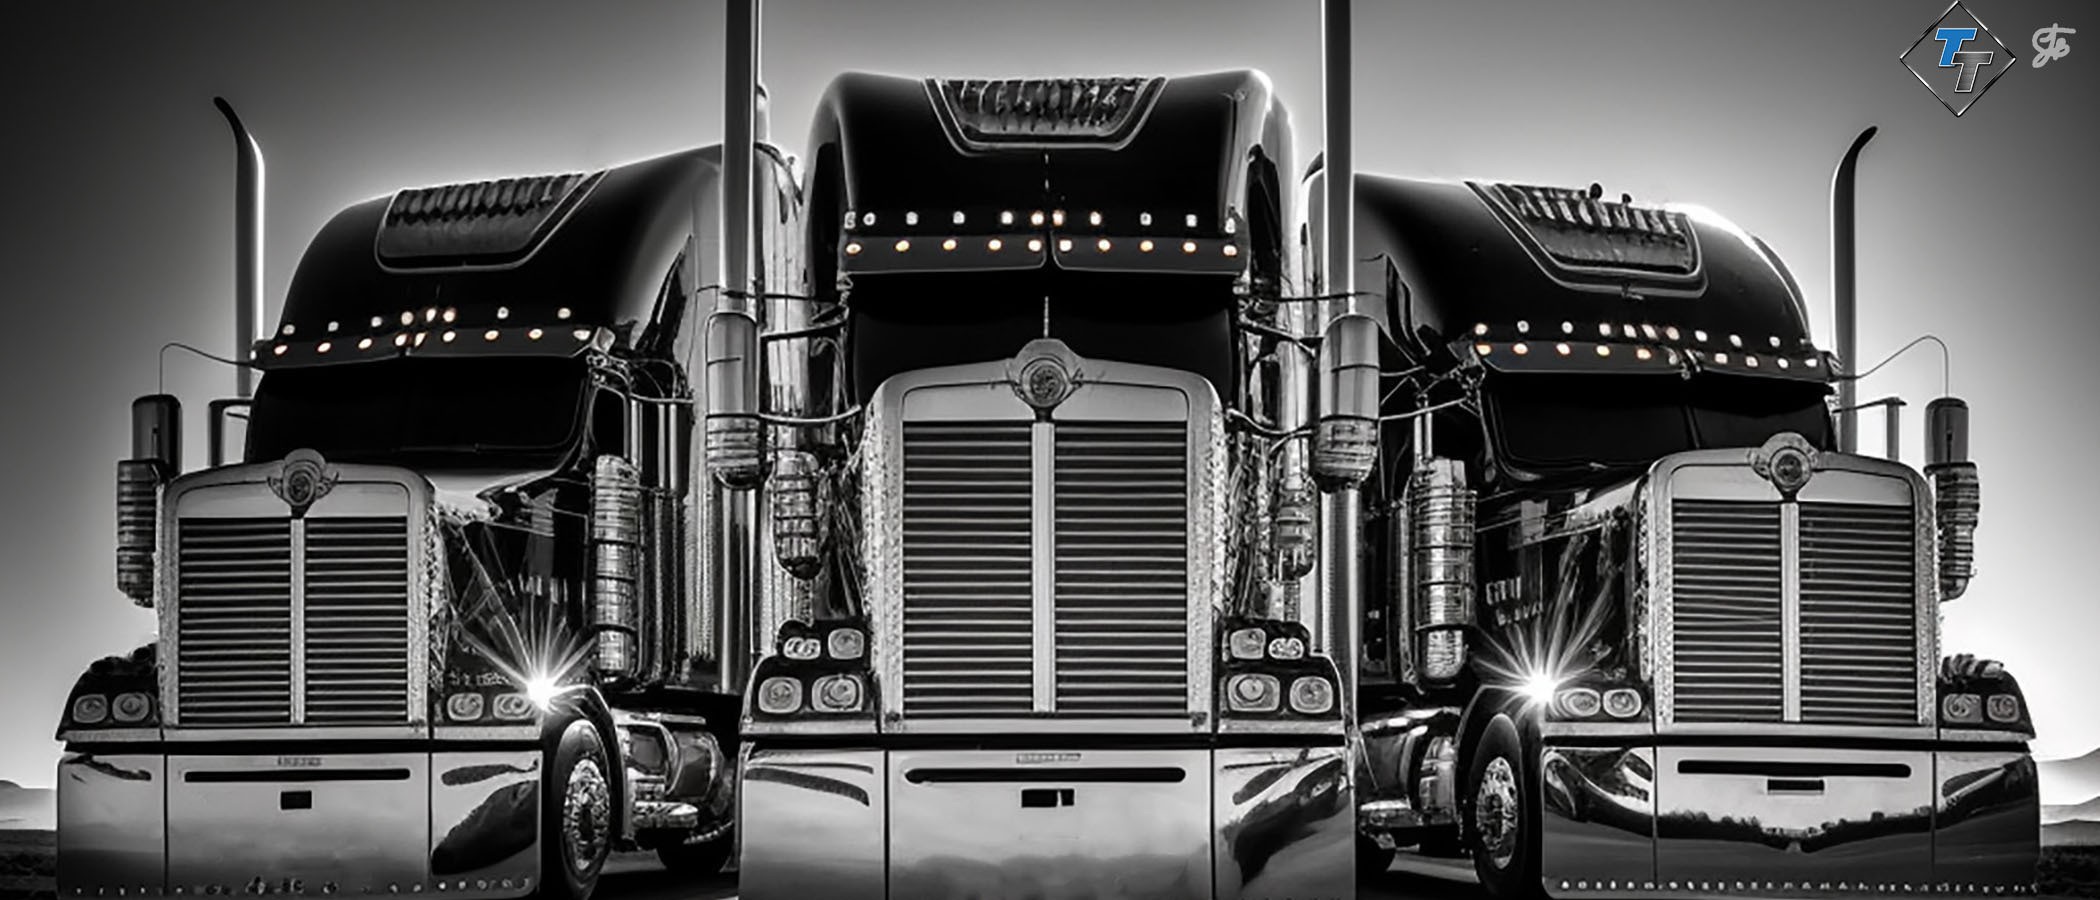 21 Must-Have Truck Accessories (For Novice and Veteran Truckers) -  Equipment Experts Inc. Equipment Experts Inc.